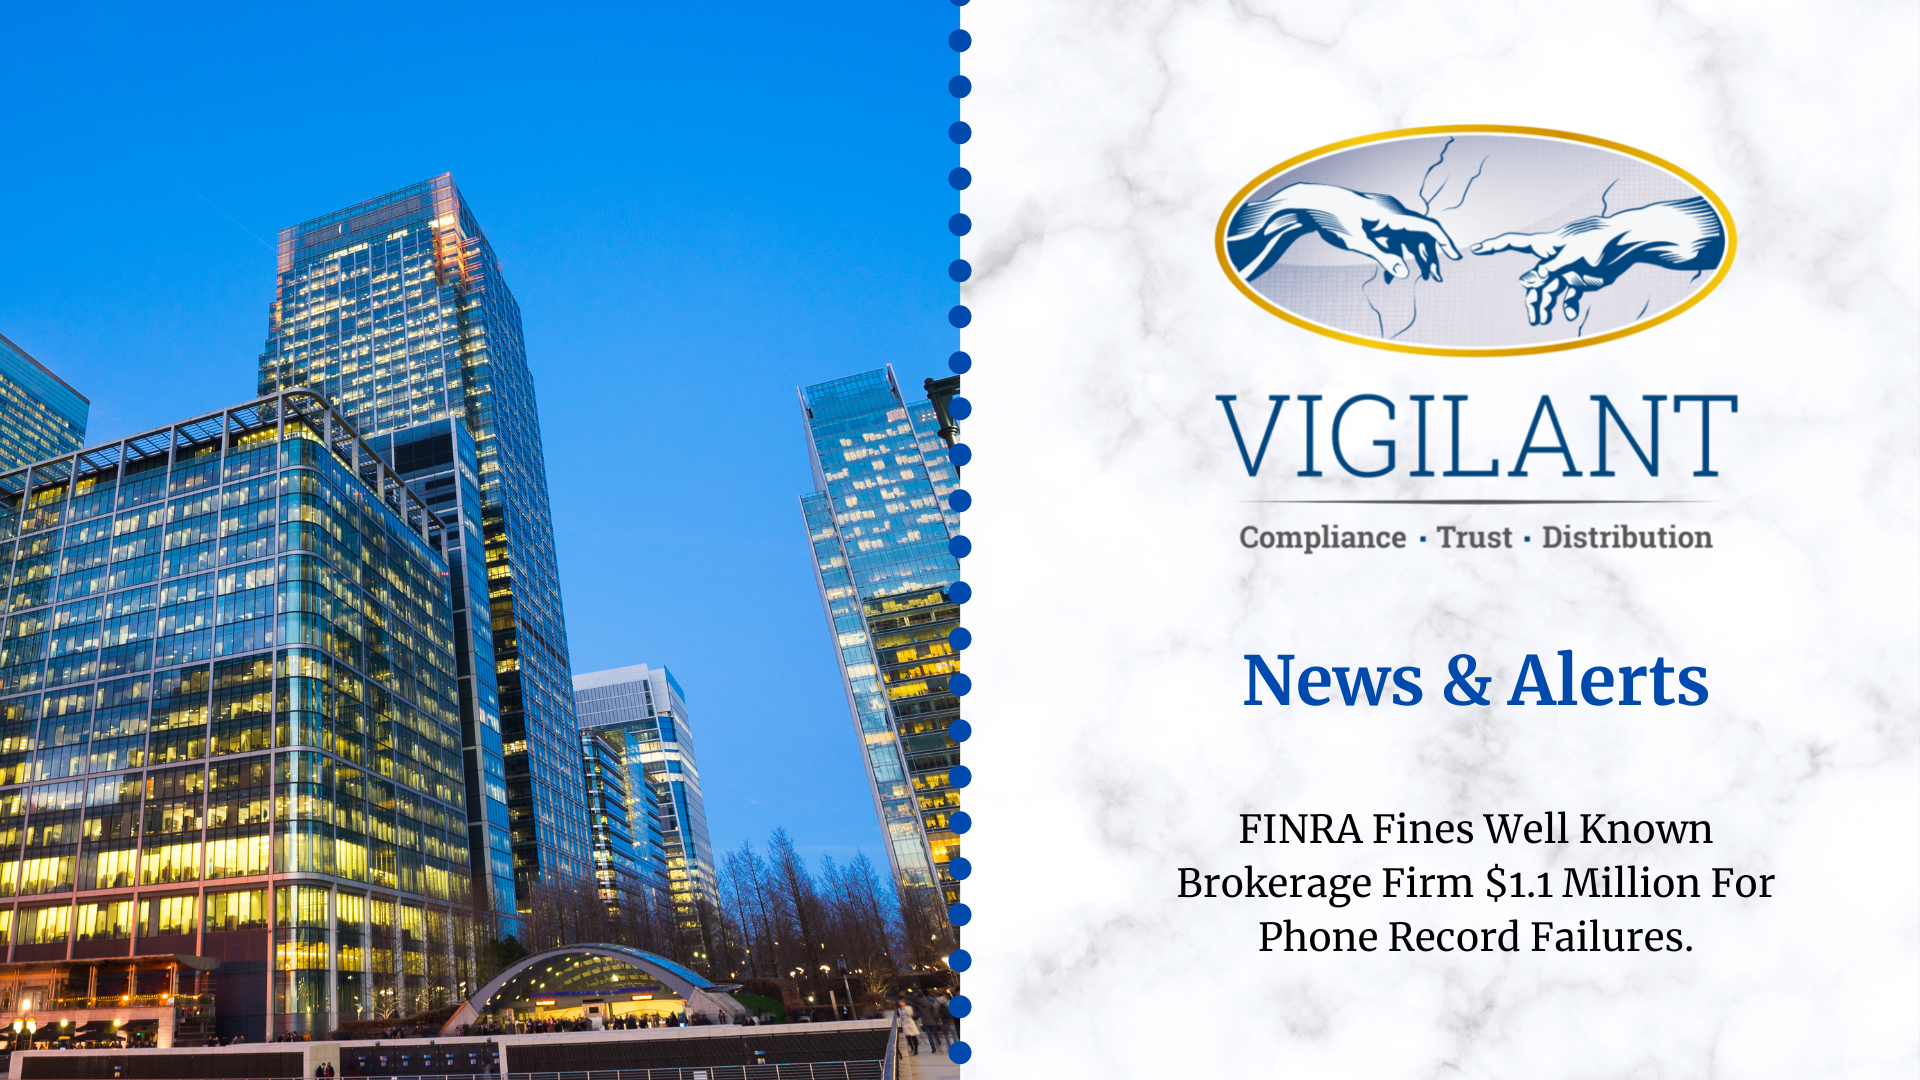  FINRA Fines Well Known Brokerage Firm $1.1 Million For Phone Record Failures 